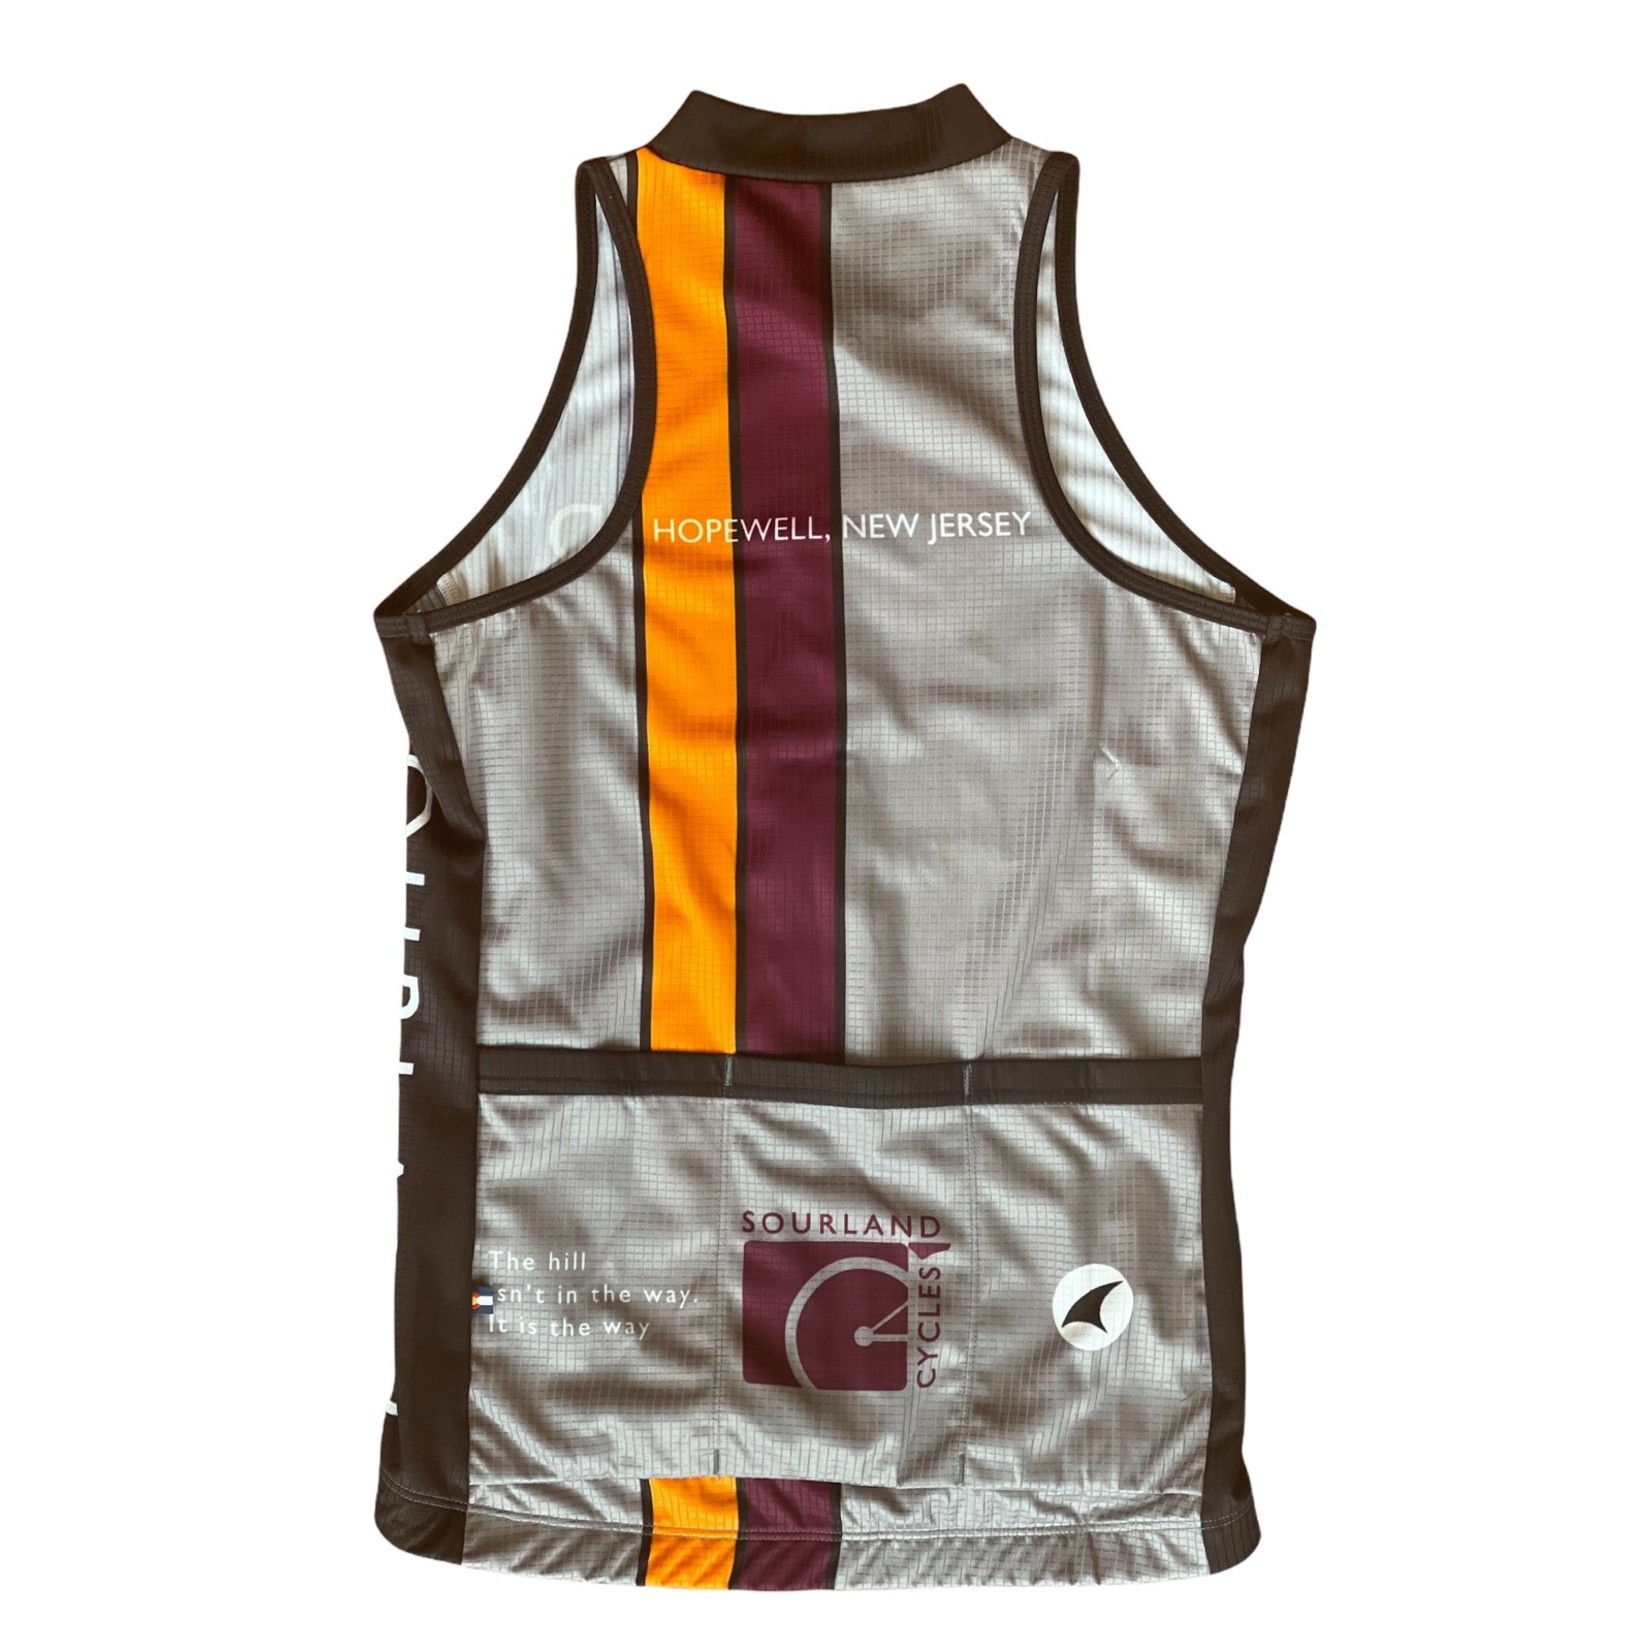 Pactimo Sourland Cycles Women's Sleeveless Let's Ride! Jersey